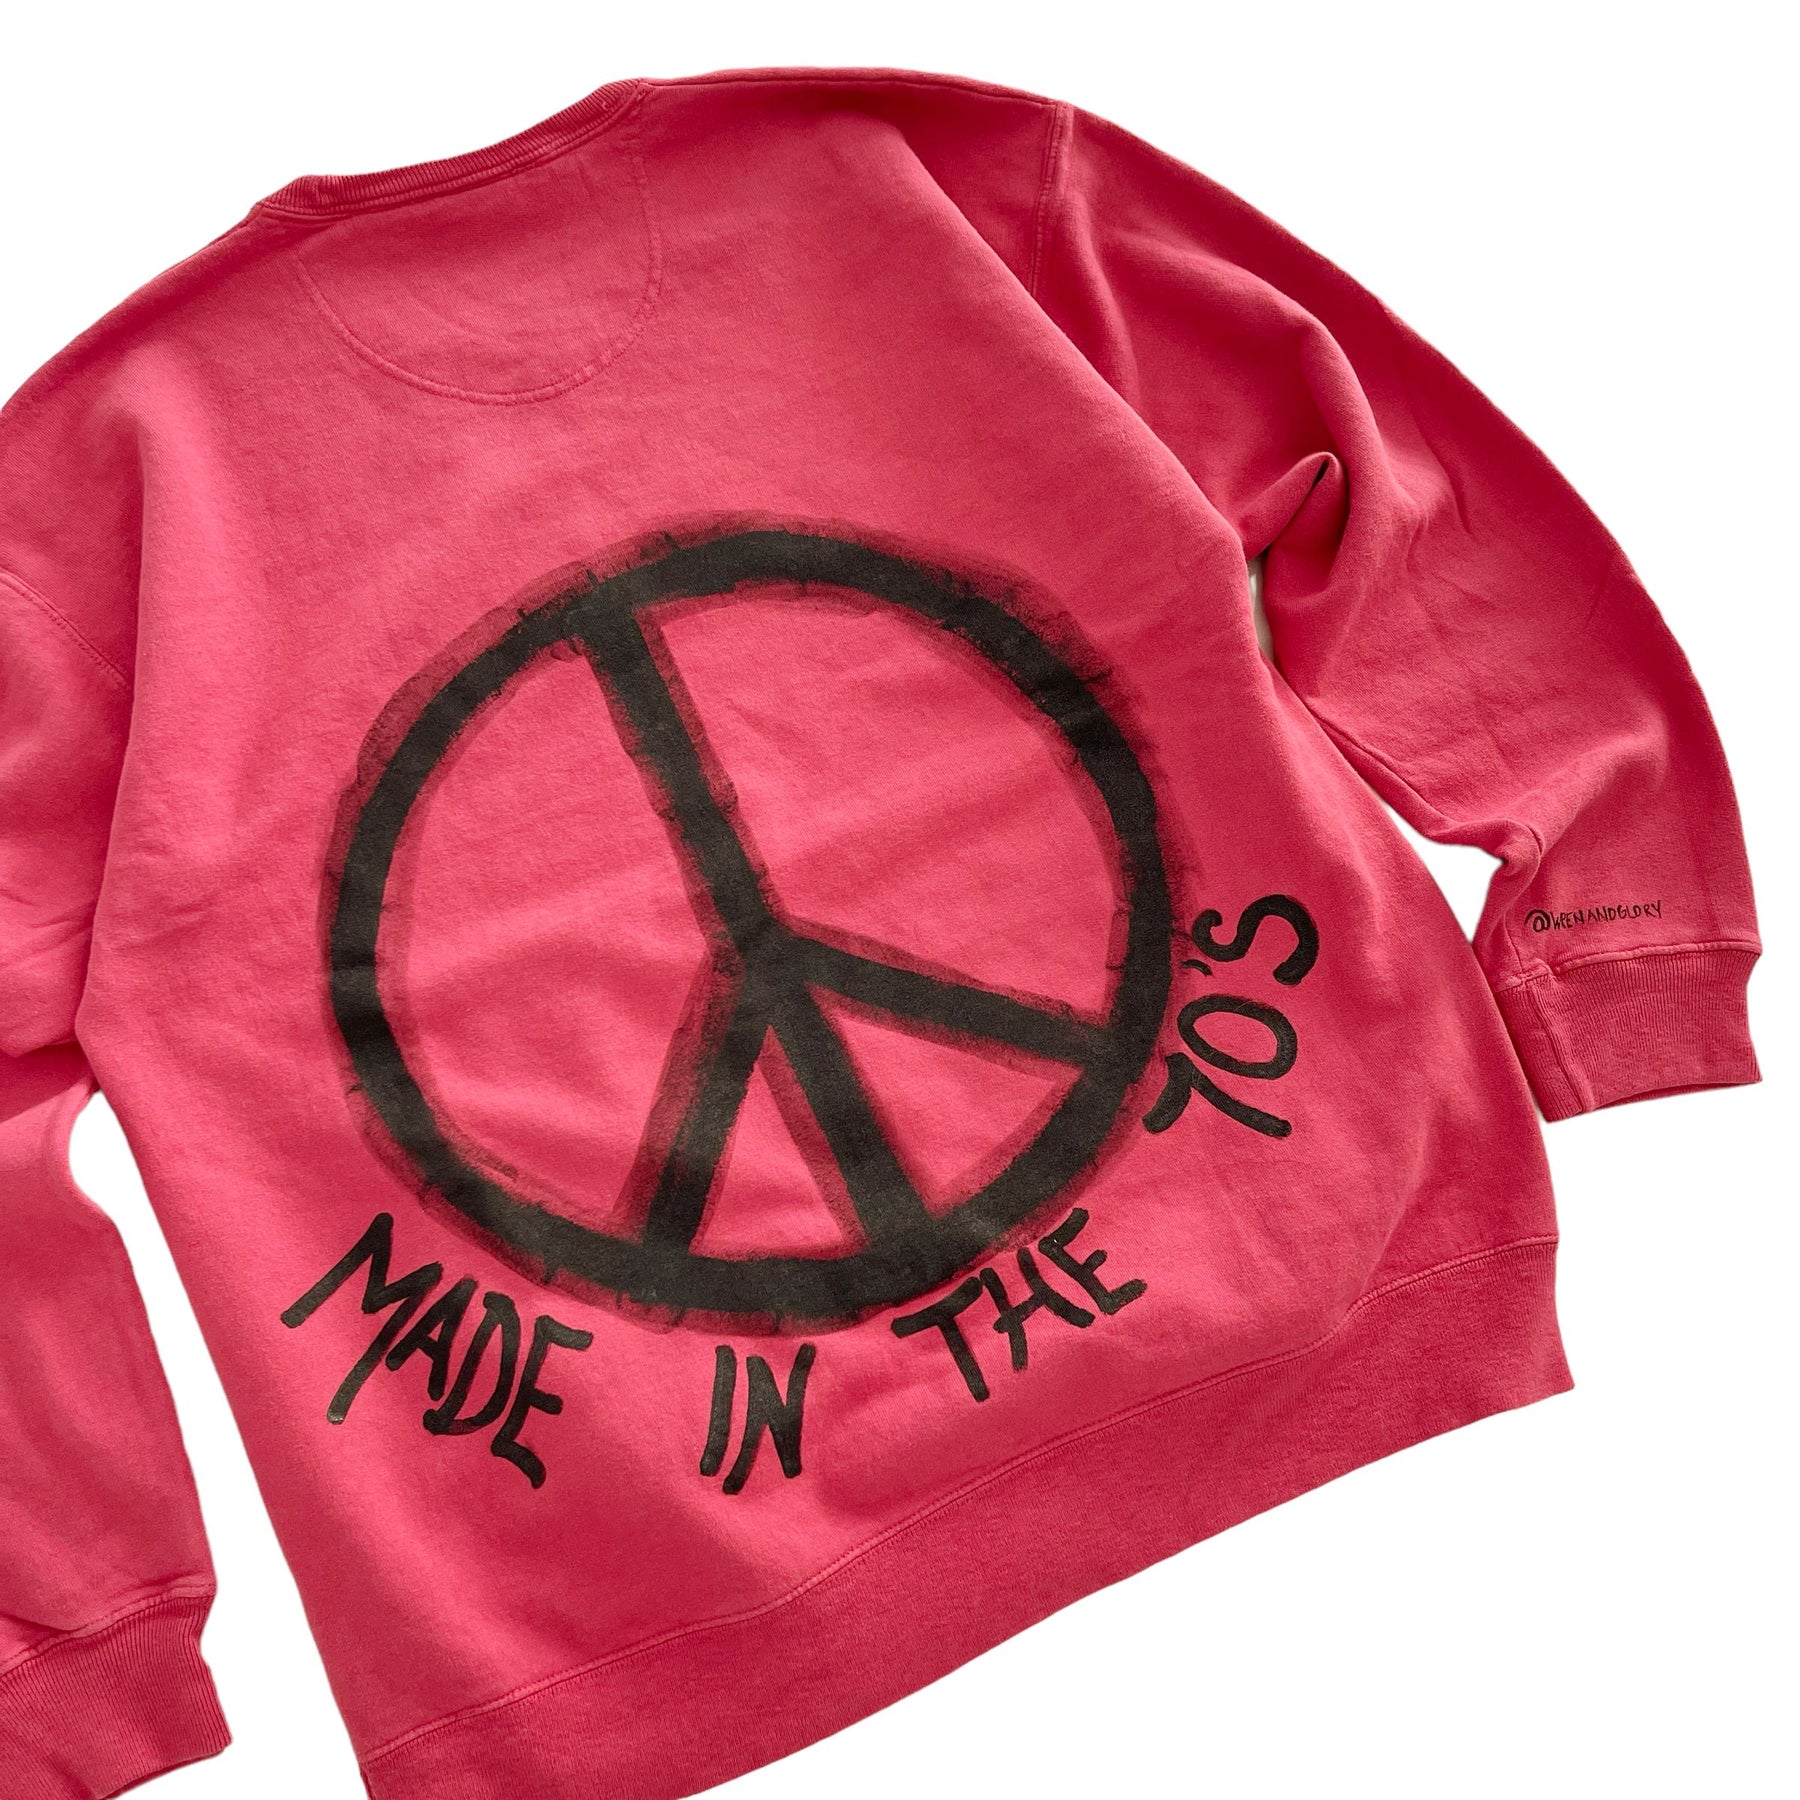 '70s Baby!' Painted Red Crewneck